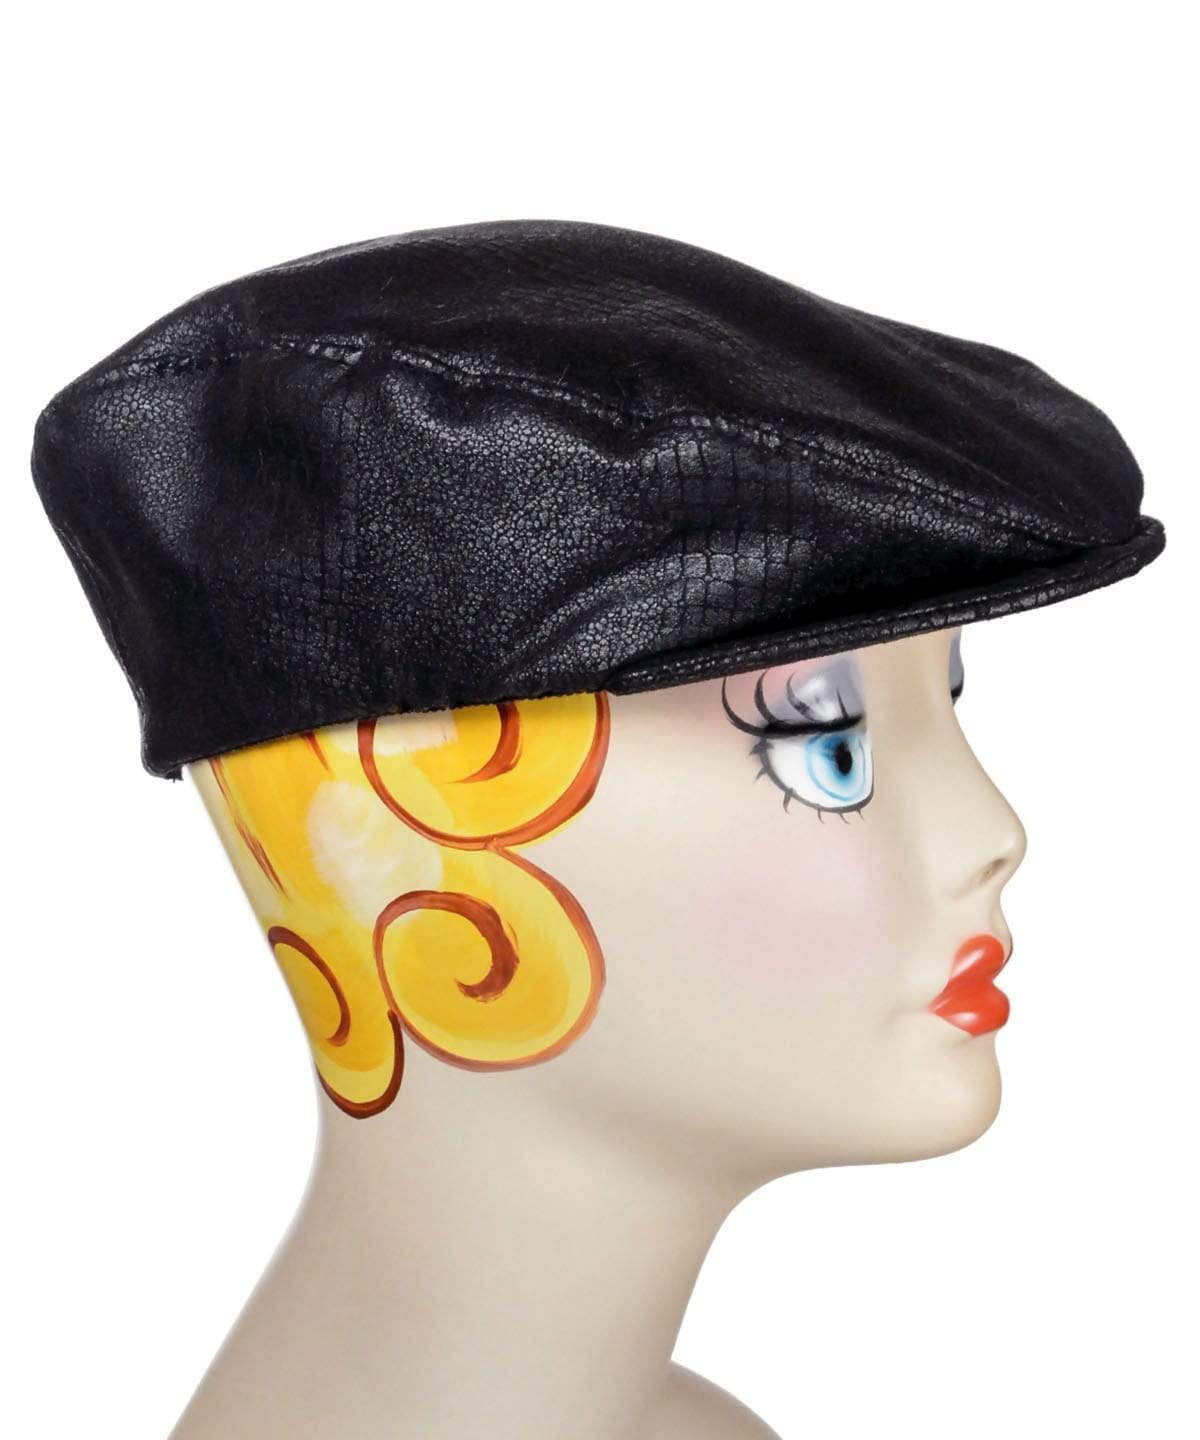 Charlie Driving Cap- Vegan Leather Outback in Black